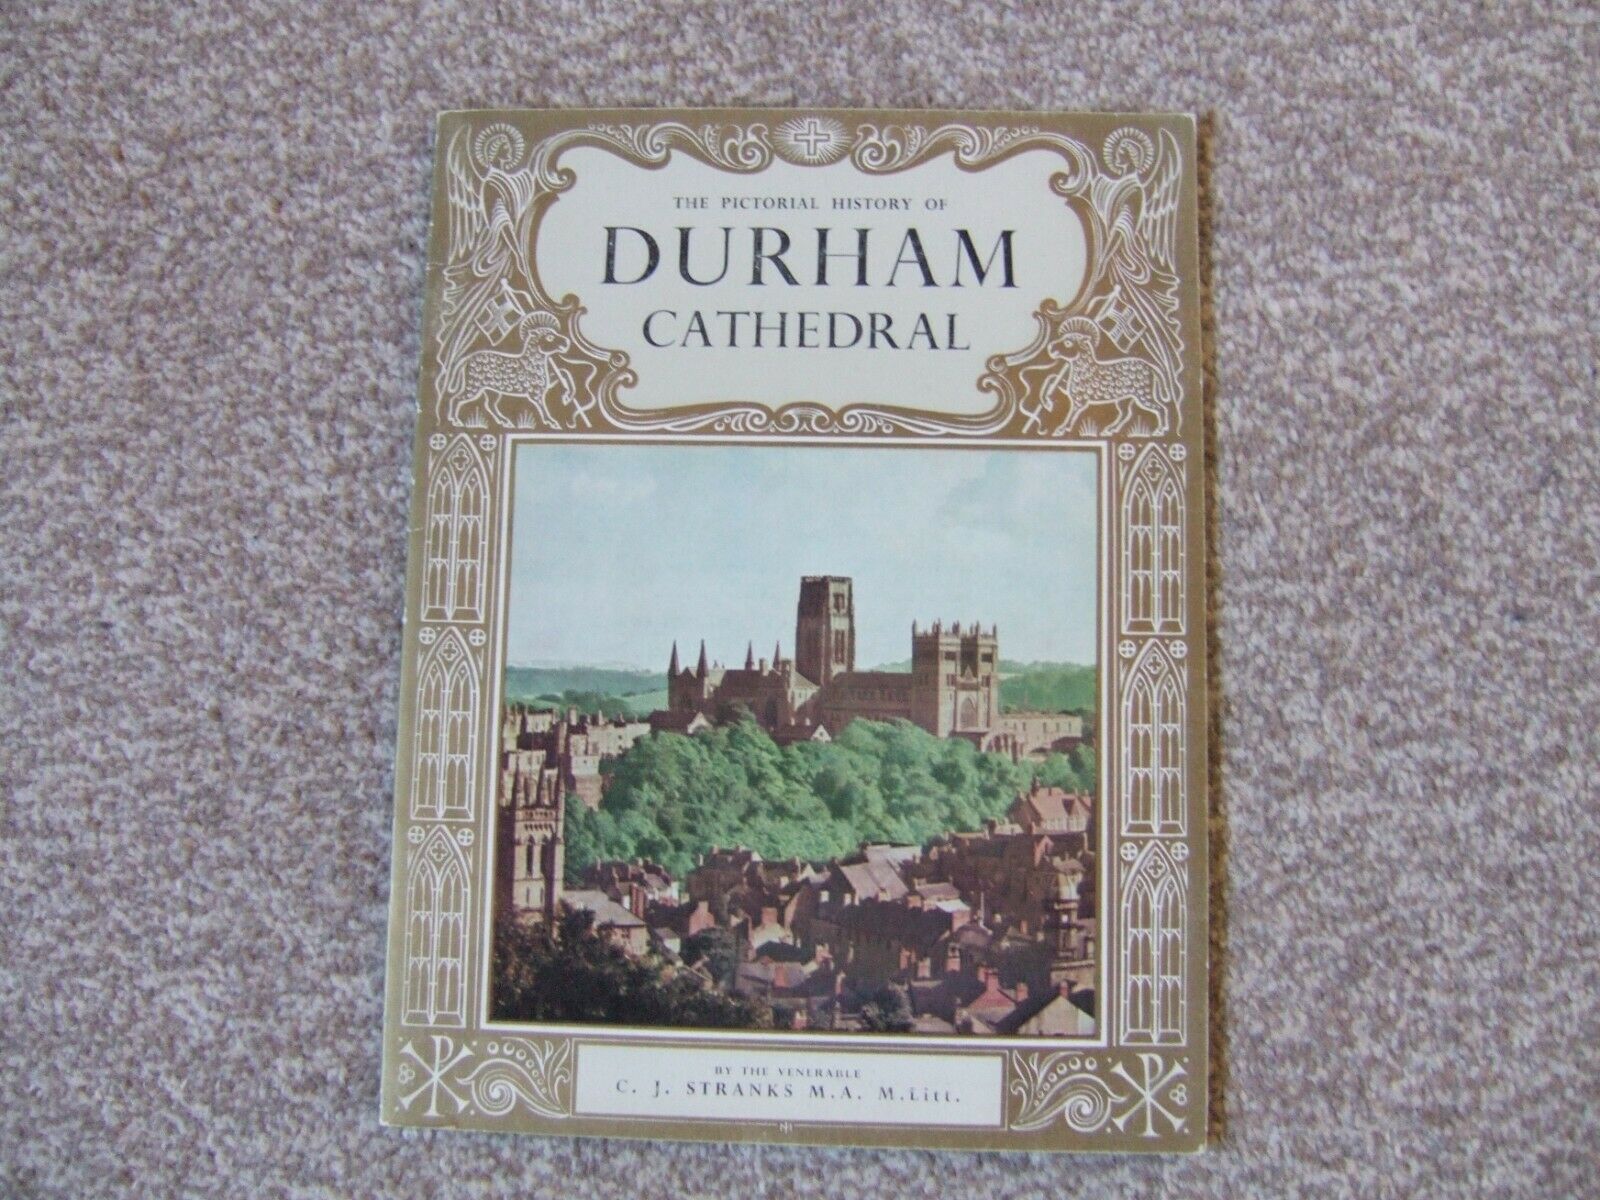 House Clearance - Durham Cathedral - 1962 Pictorial History Guide Book